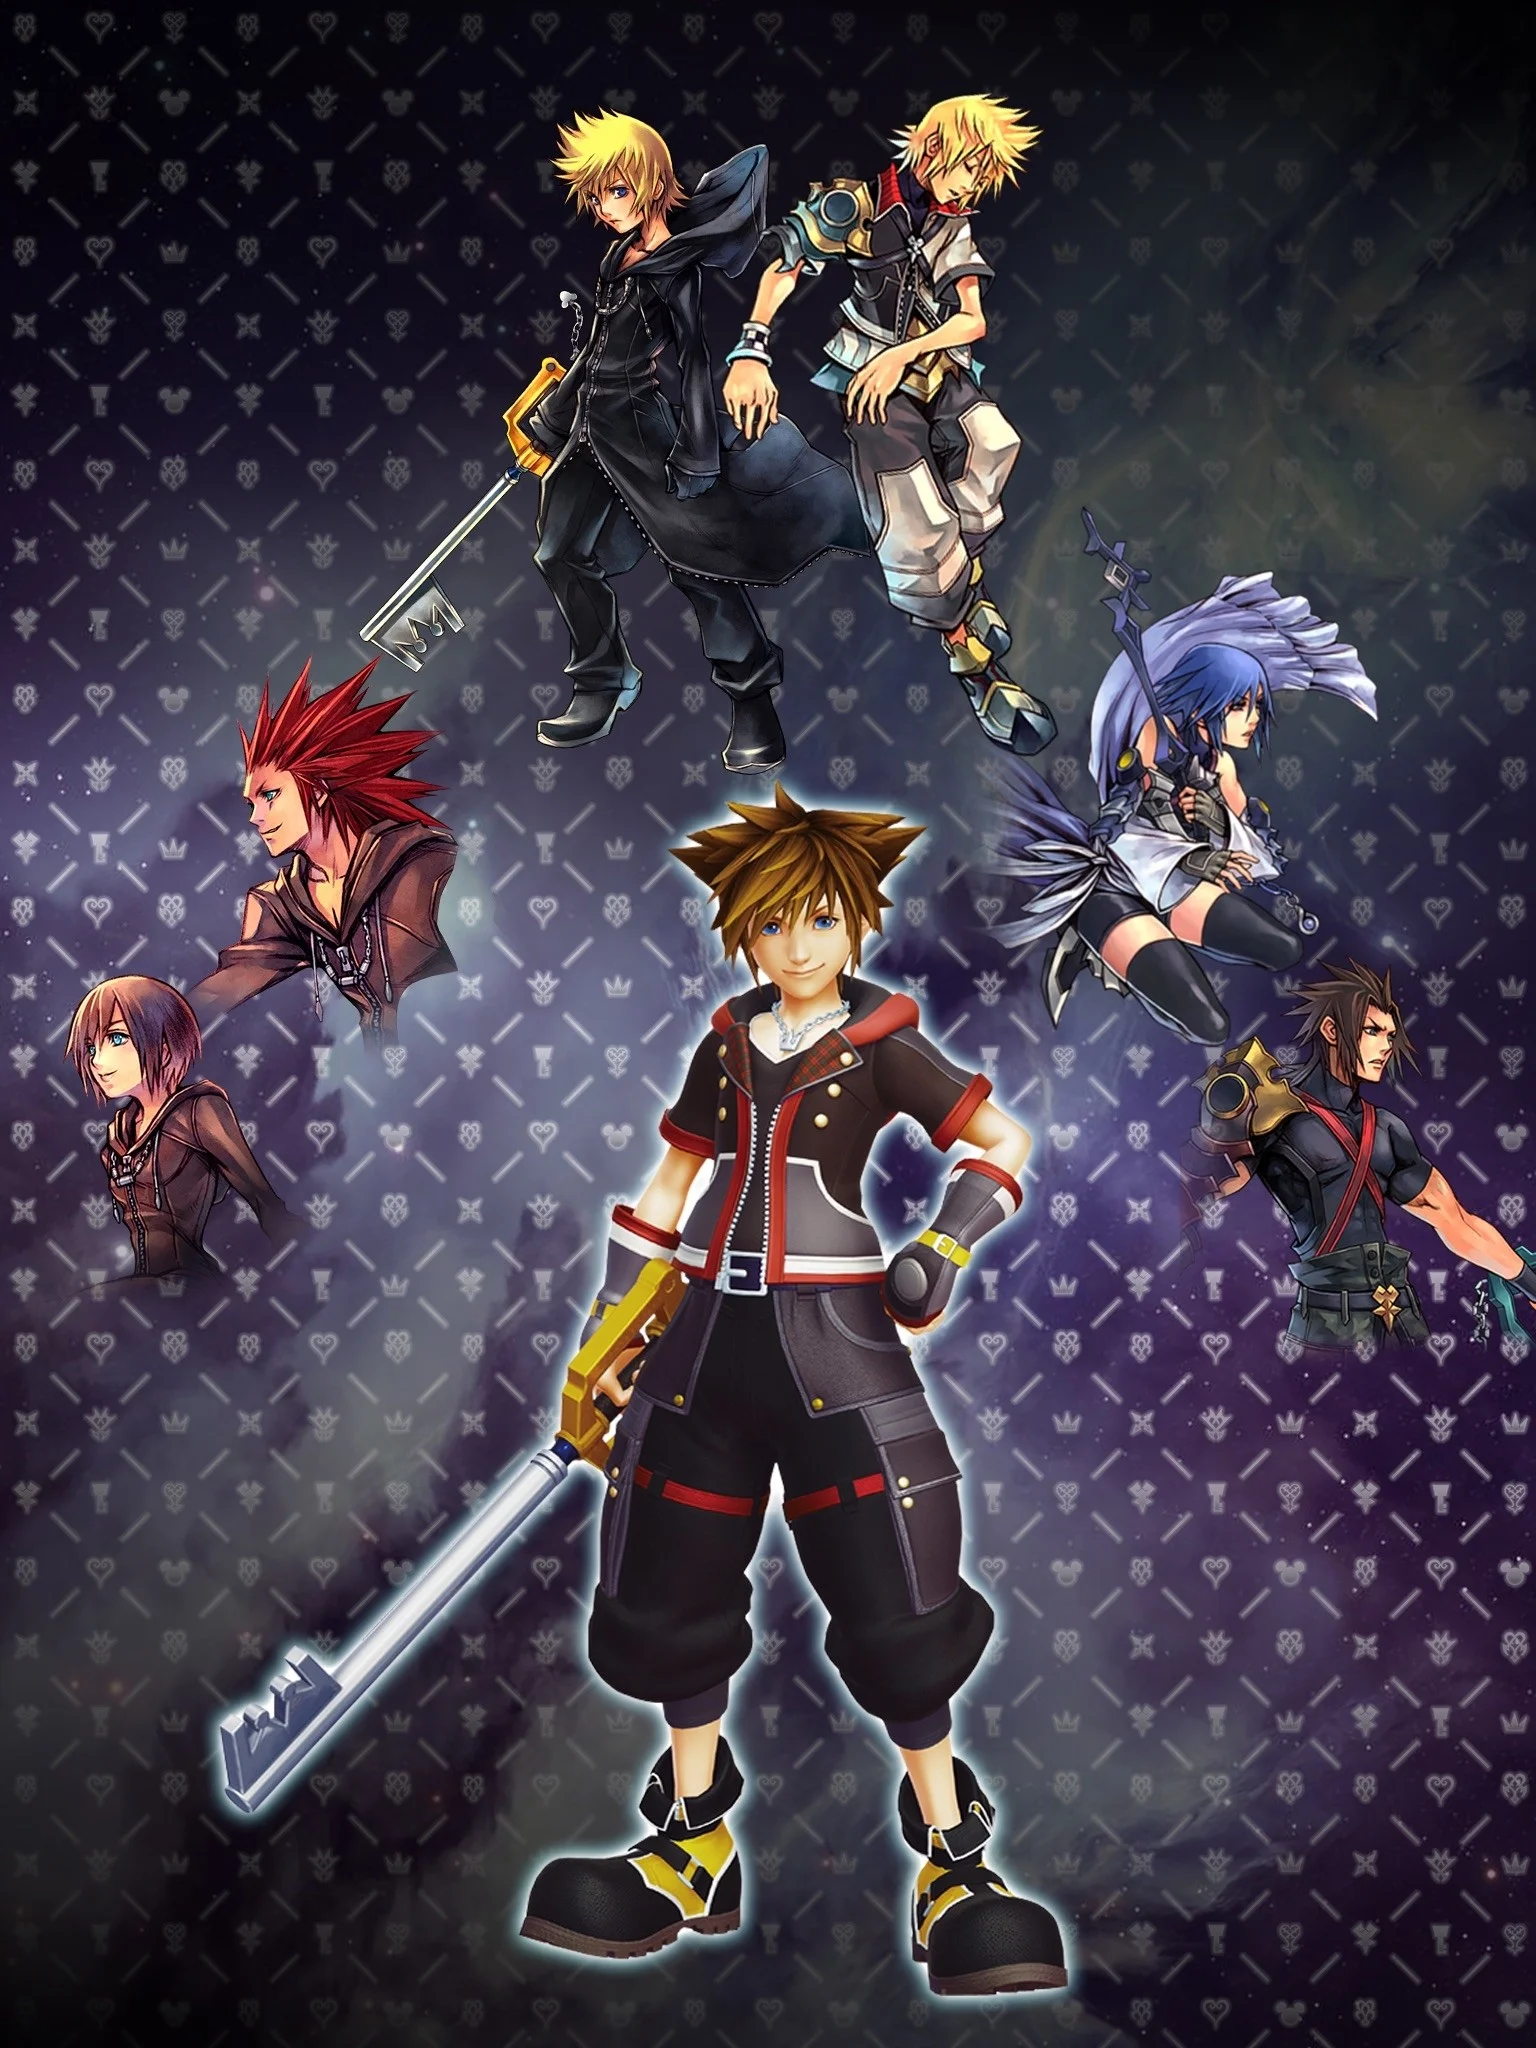 Kingdom Hearts Wallpapers  Top 35 Best Kingdom Hearts Backgrounds Download